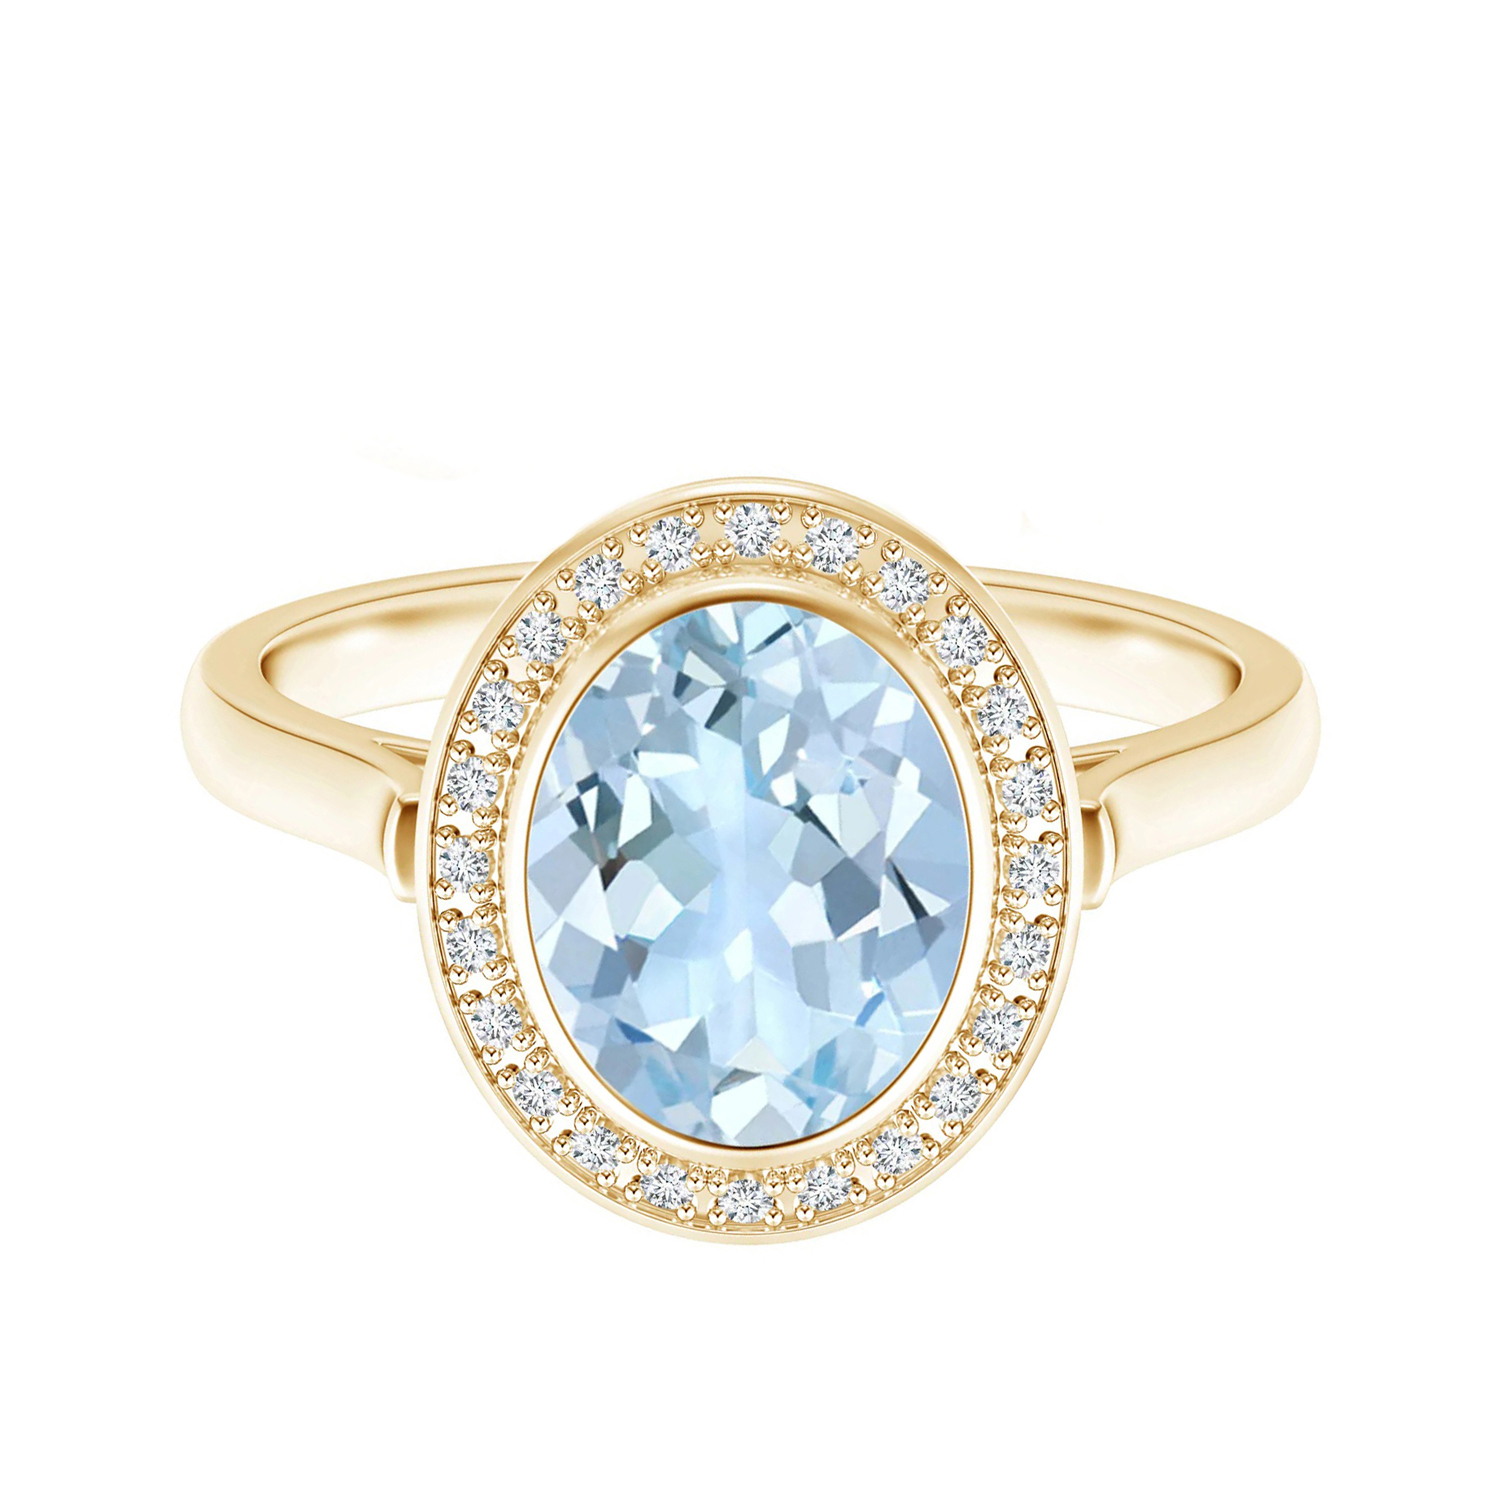 Vintage Style Oval Cut Blue Aquamarine Gemstone Solitaire Ring 9K Yellow Gold